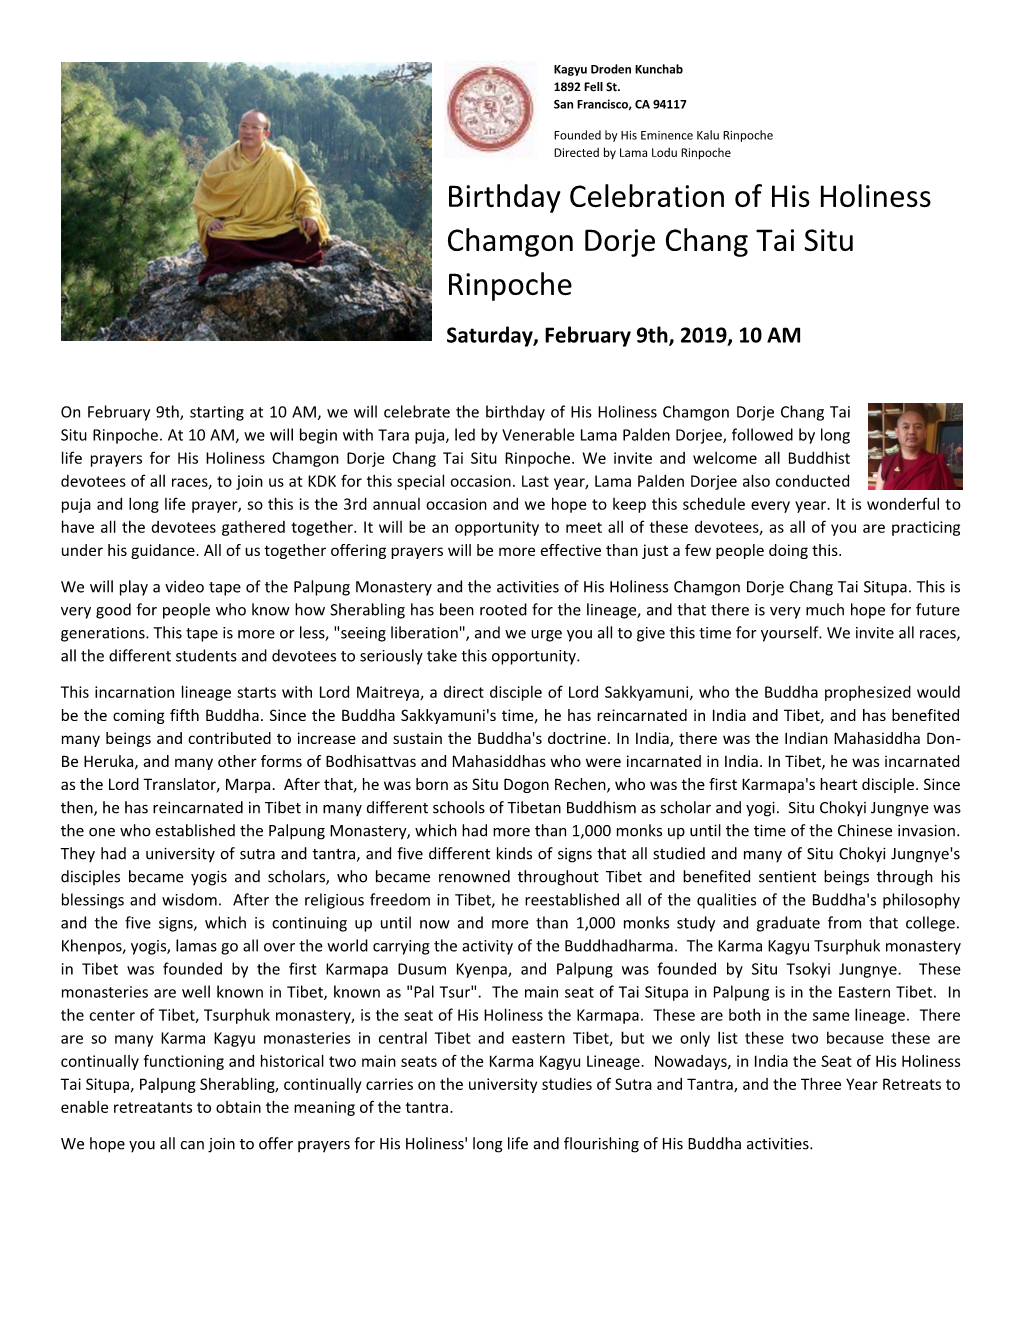 Birthday Celebration of His Holiness Chamgon Dorje Chang Tai Situ Rinpoche Saturday, February 9Th, 2019, 10 AM